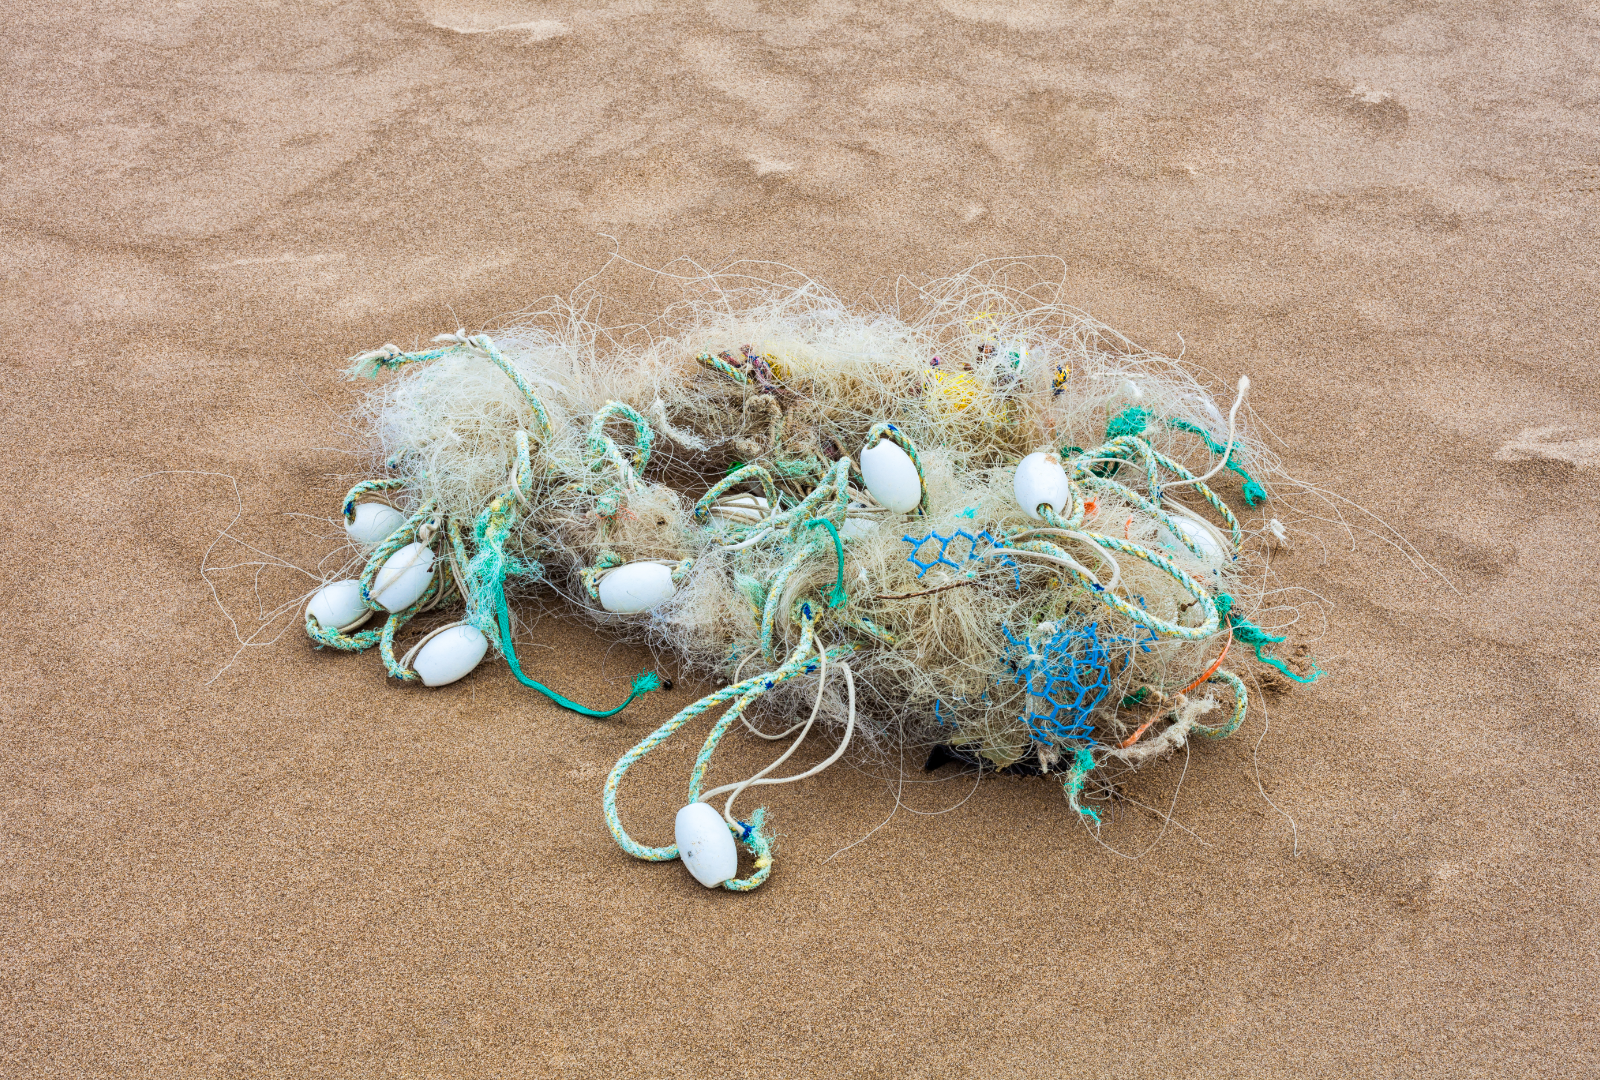 old fishing nets and other marine debris washed up on a sandy beach